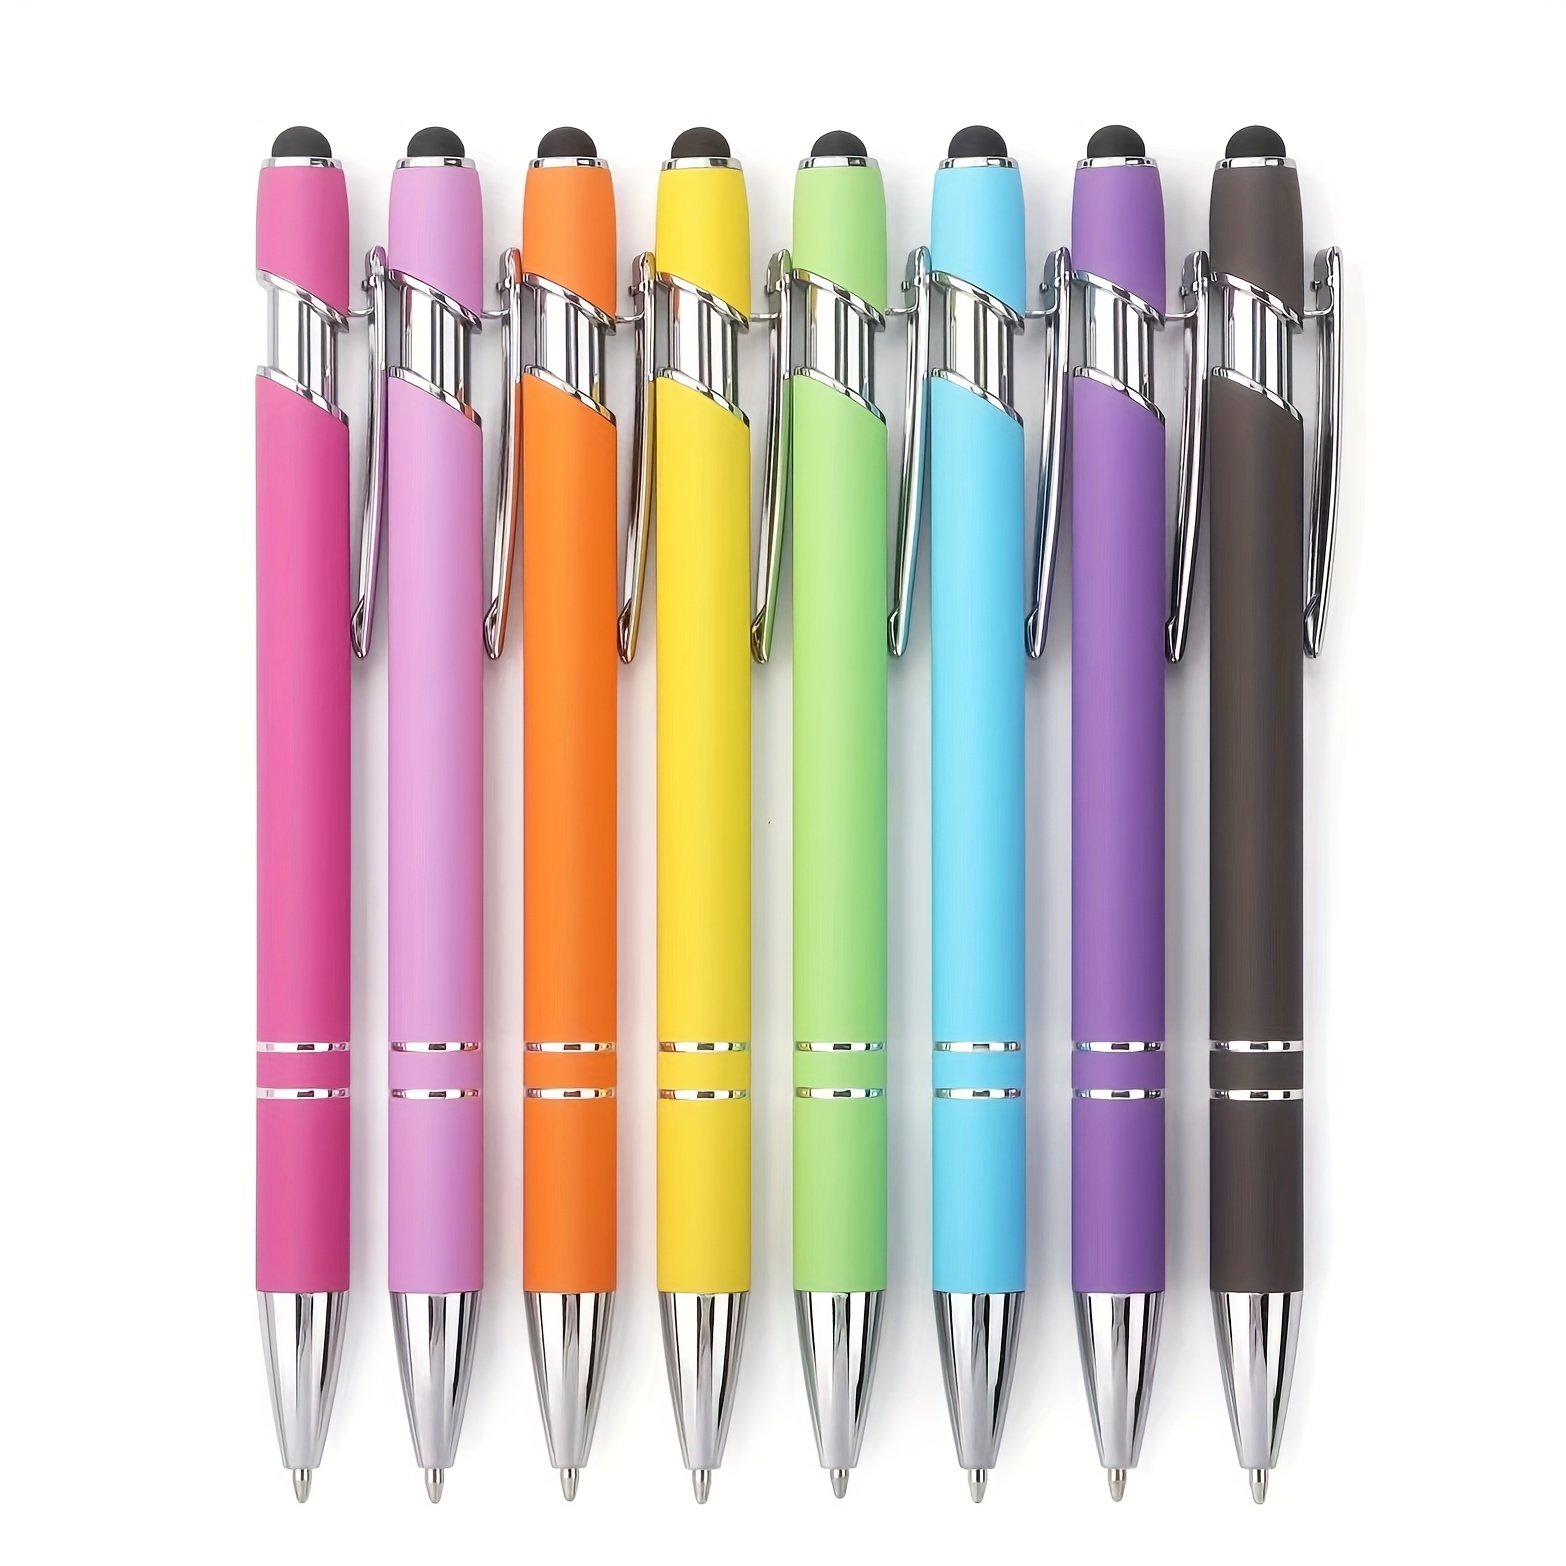 

8-pack 2-in-1 Retractable Ballpoint Pens & Stylus Combo - Metal Body With 1.0mm Medium Point & Responsive Stylus Tip For Touchscreens - Assorted Colors For Adults 14+